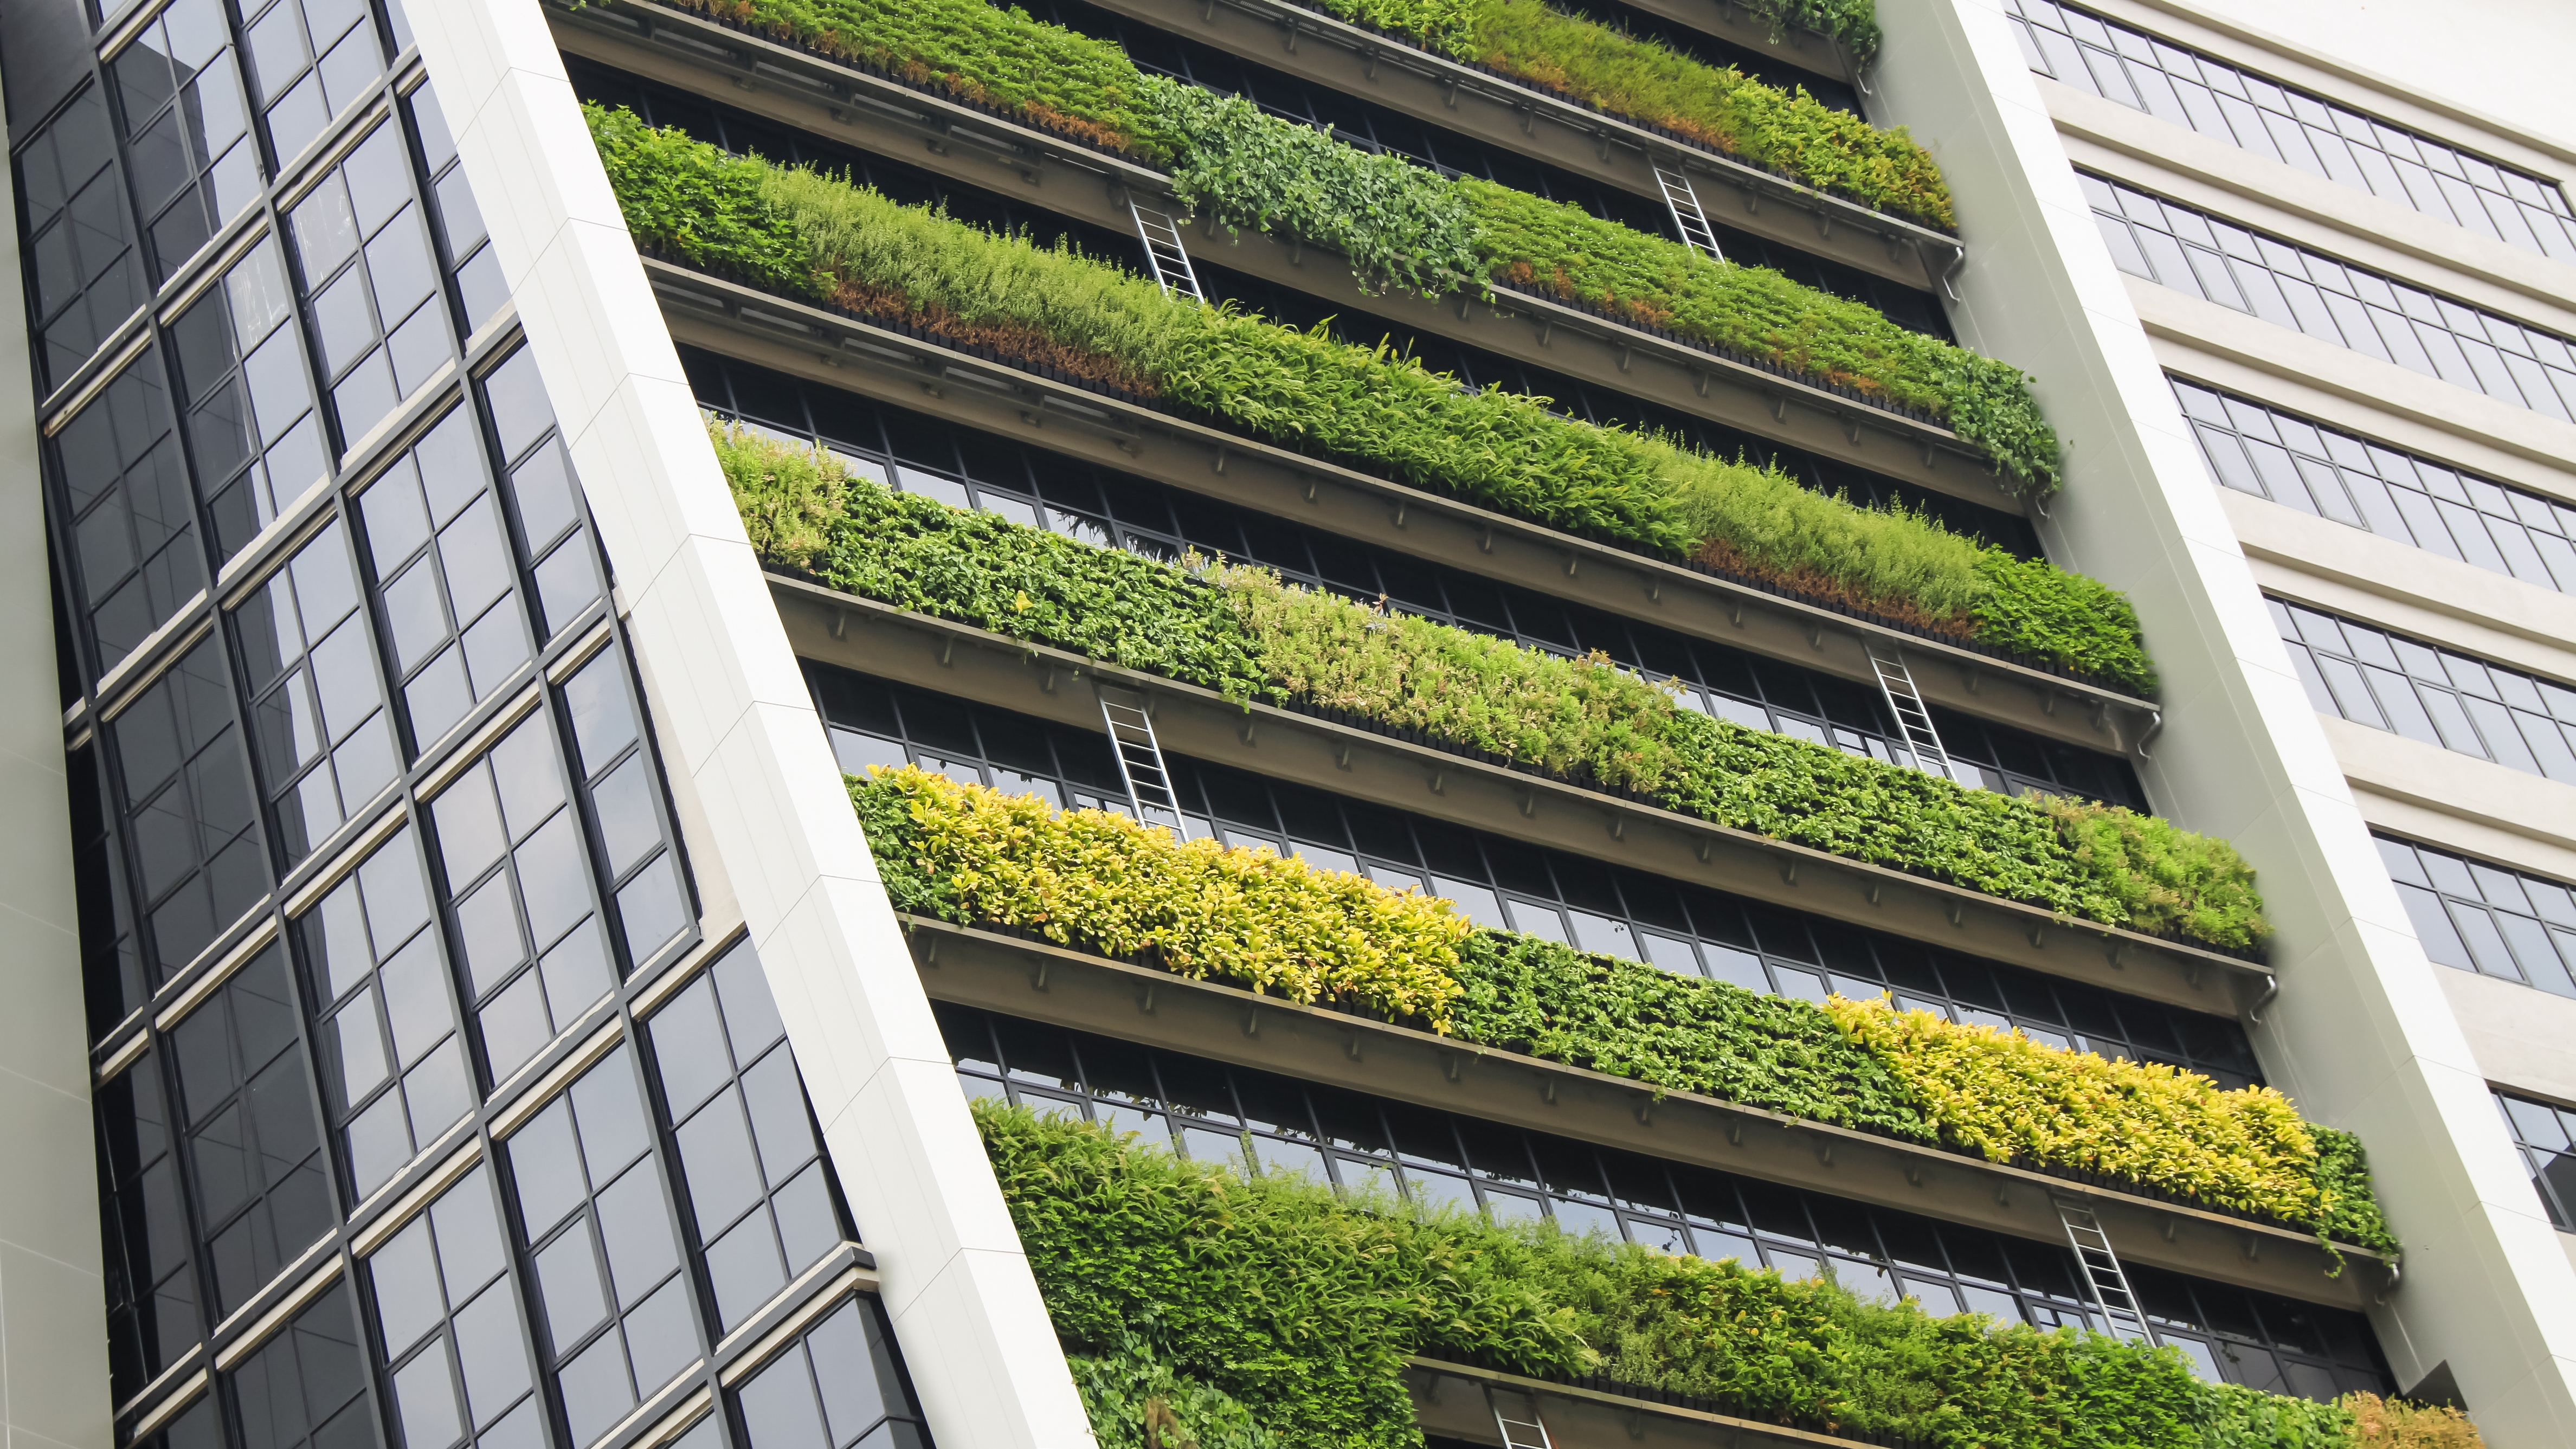 vertical garden a concept of sustainable building, eco building landscape climbing plants; Shutterstock ID 1089389966; purchase_order: N/A; job: PJ Vincent Bryant July 2022; client: ; other: 